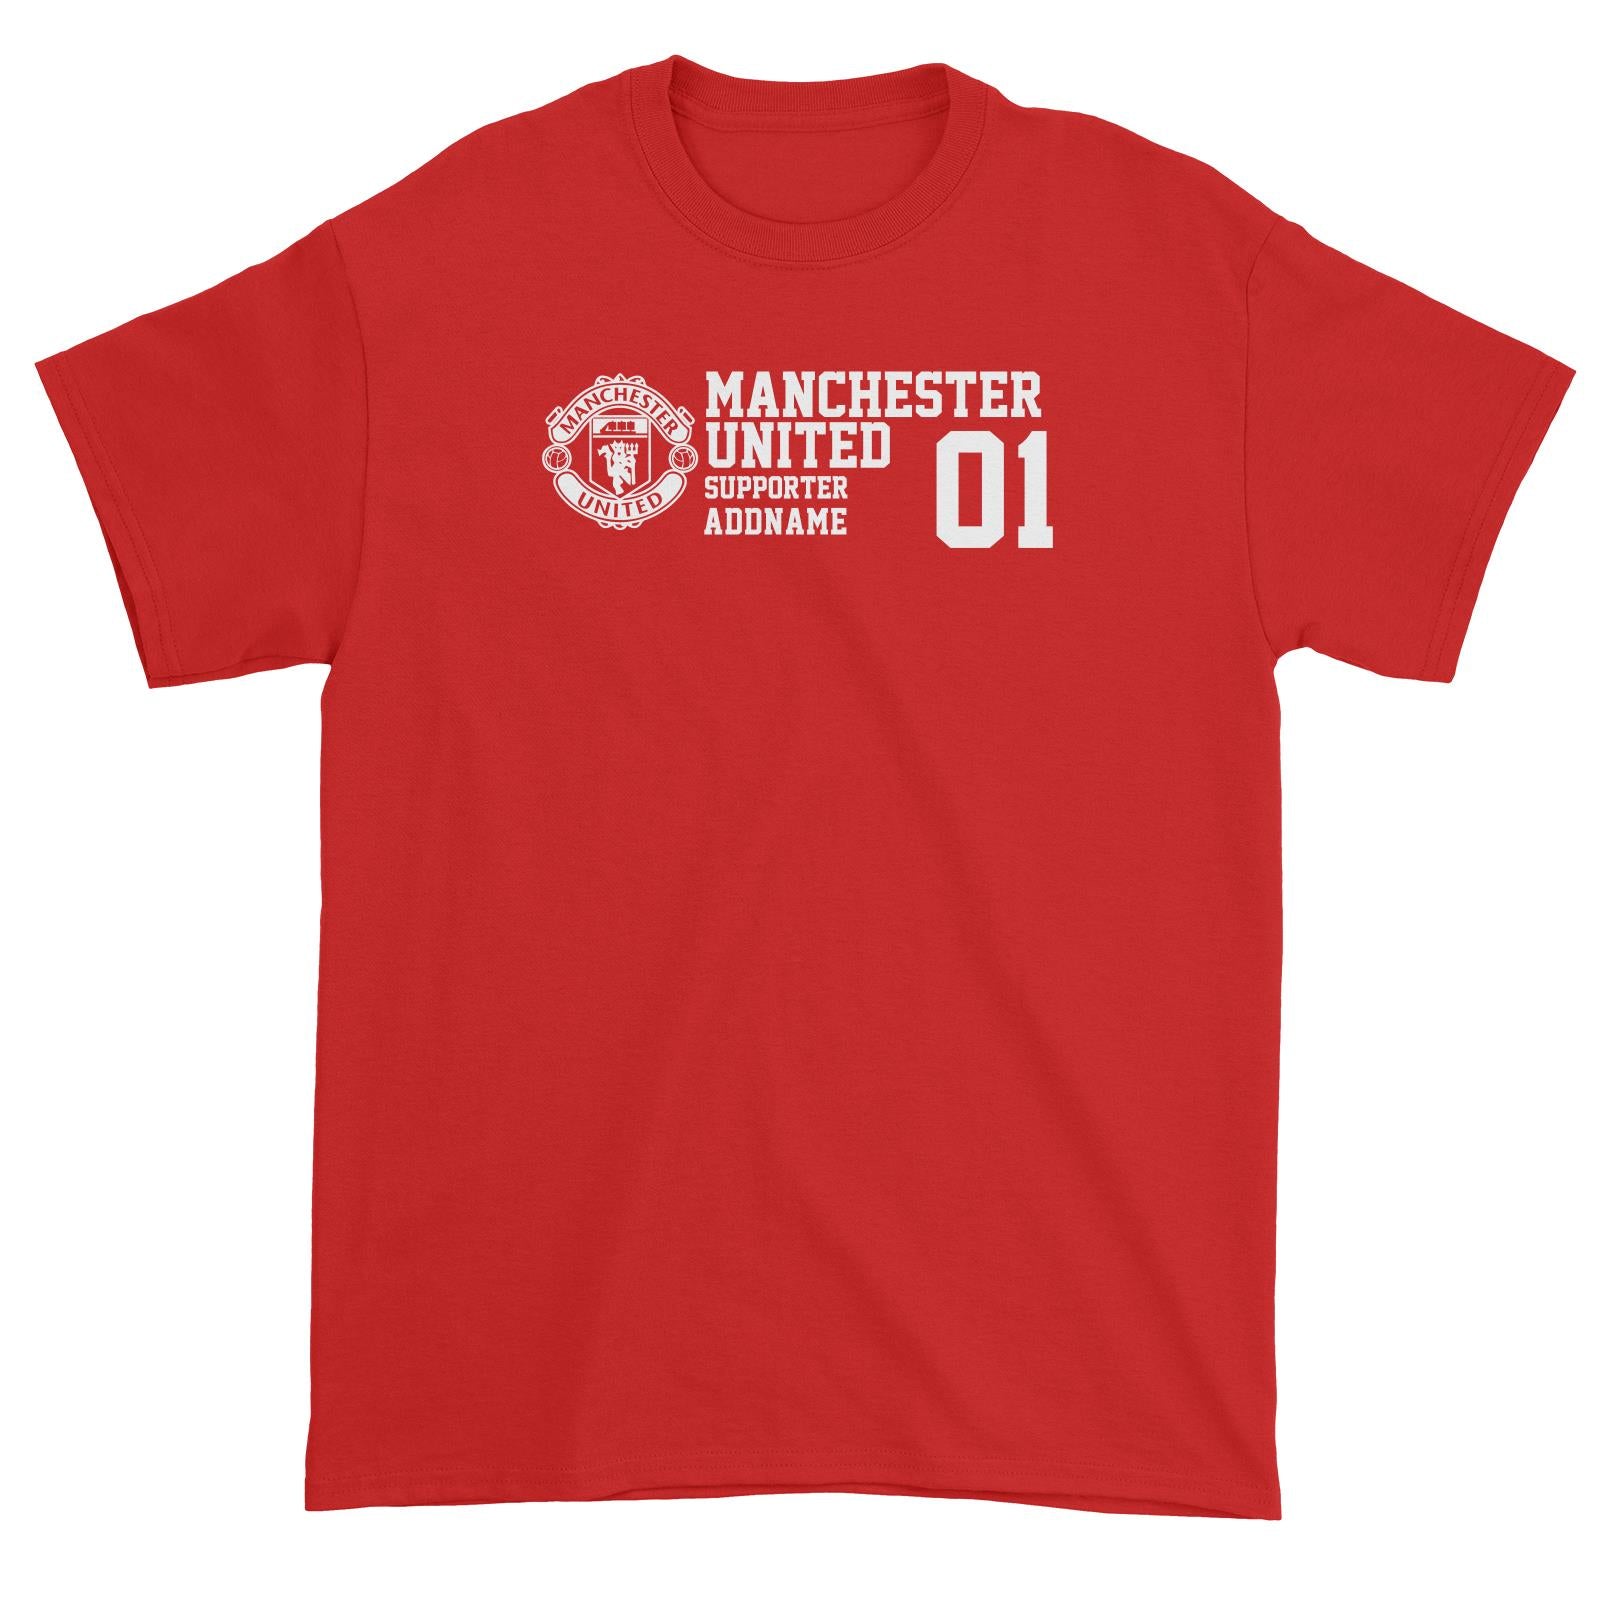 Manchester United Football Supporter Addname Unisex T-Shirt